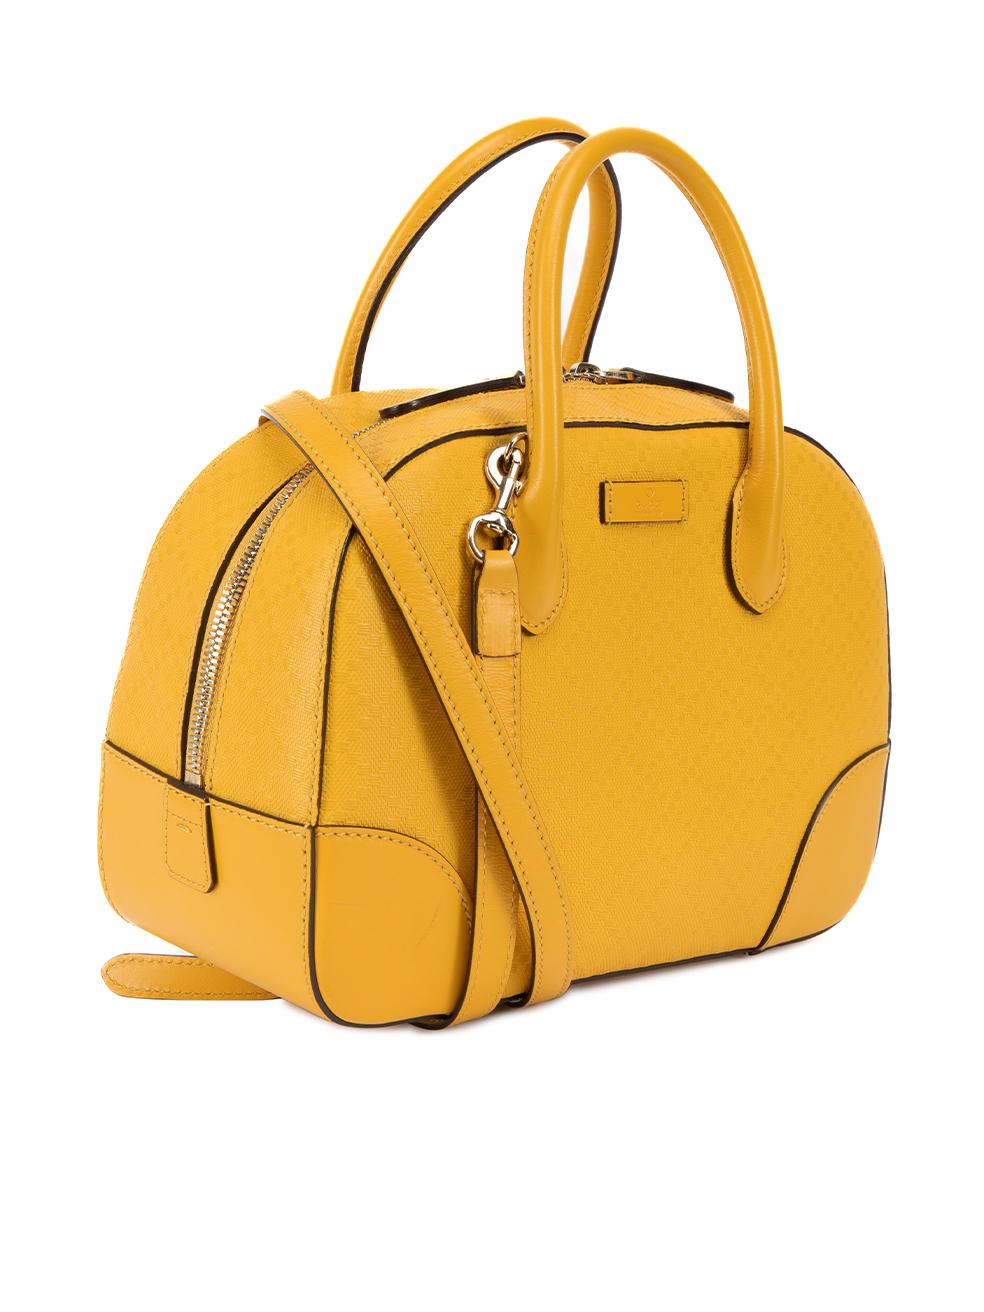 CONDITION is Very good. Minimal wear to bag is evident. Minimal wear to the back of bag and zip line where some small marks can be seen on this used Gucci designer resale item. This items includes the original dustbag.   Details  Yellow Leather